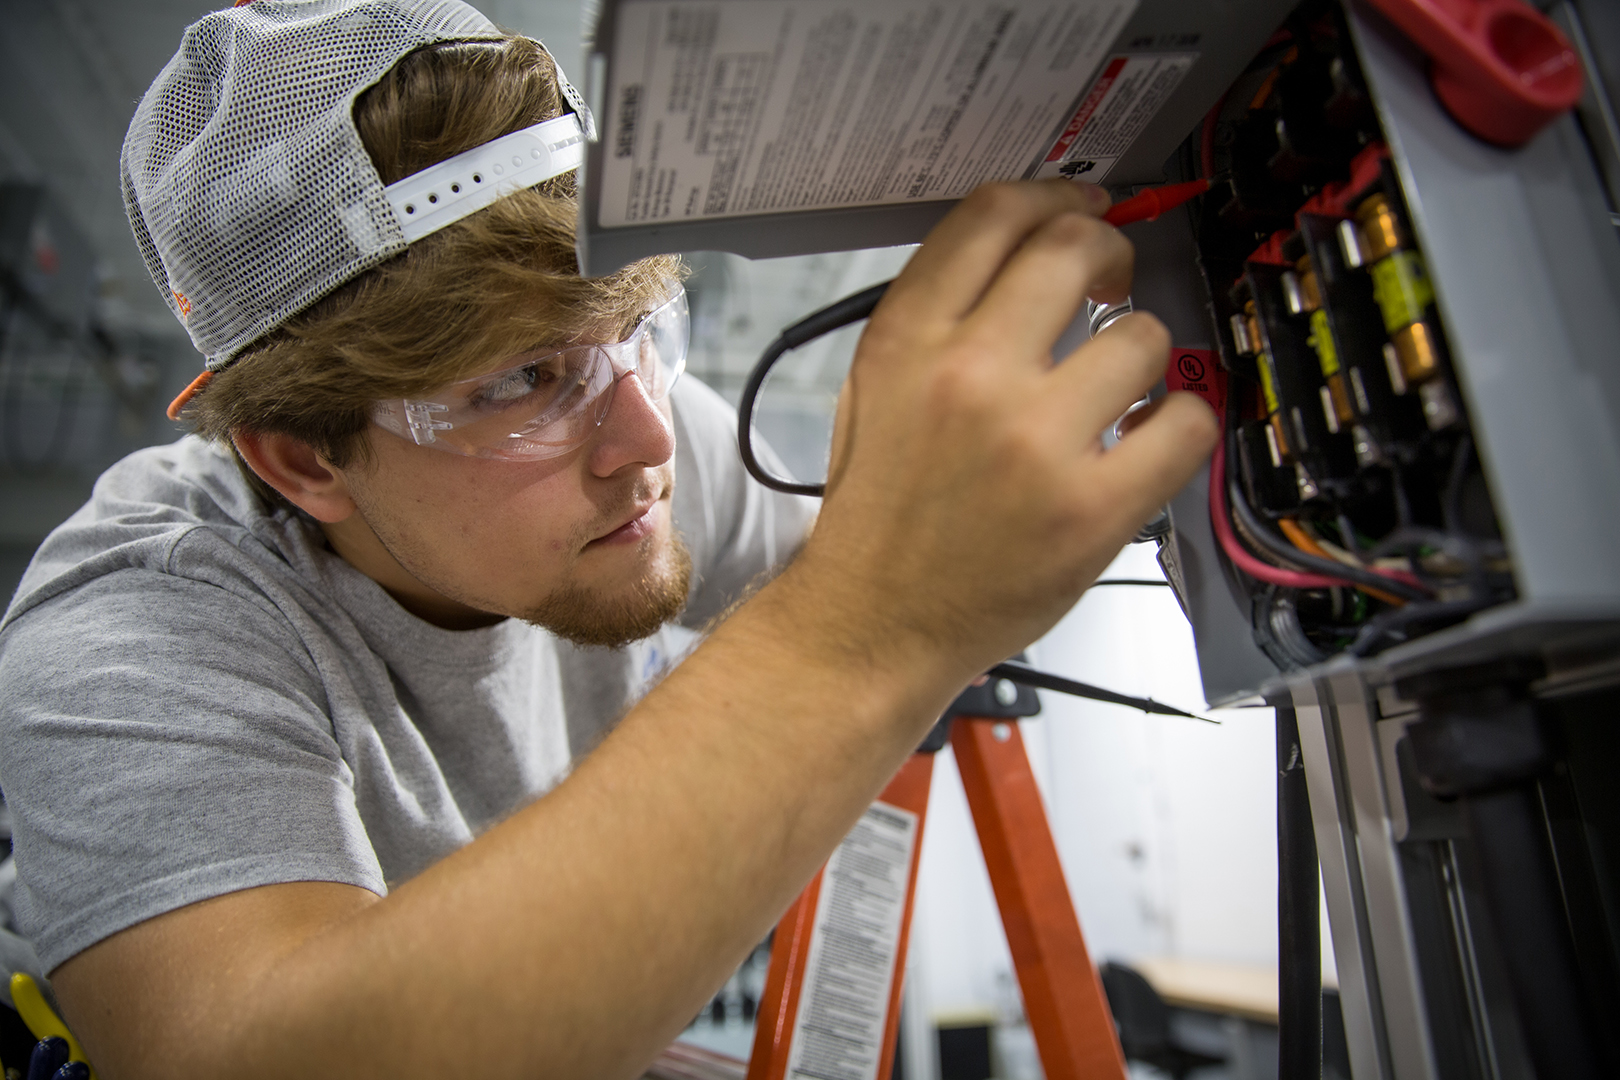 Student working on electrical equipment in class